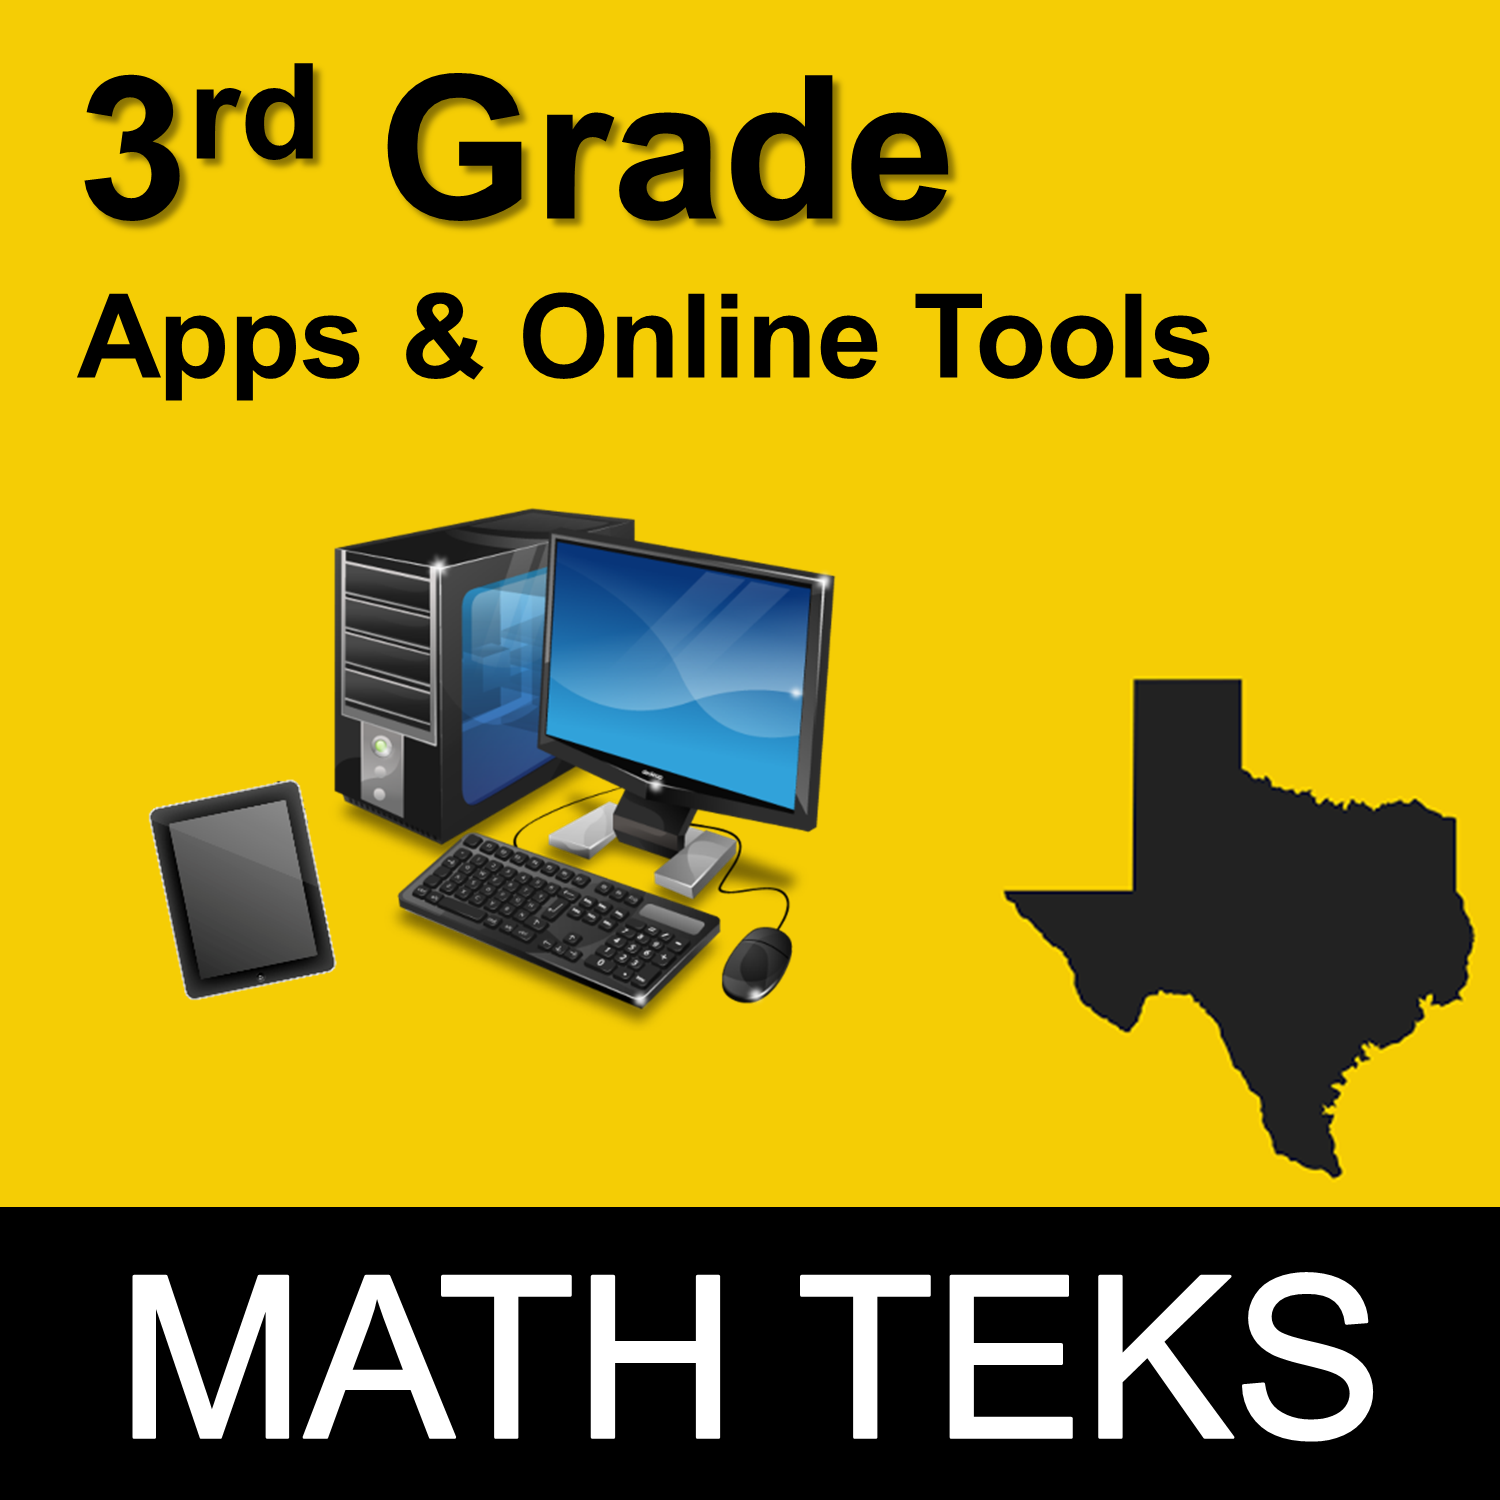 Watson Works : 3rd Grade Apps & Online Tools for Every MATH TEKS!